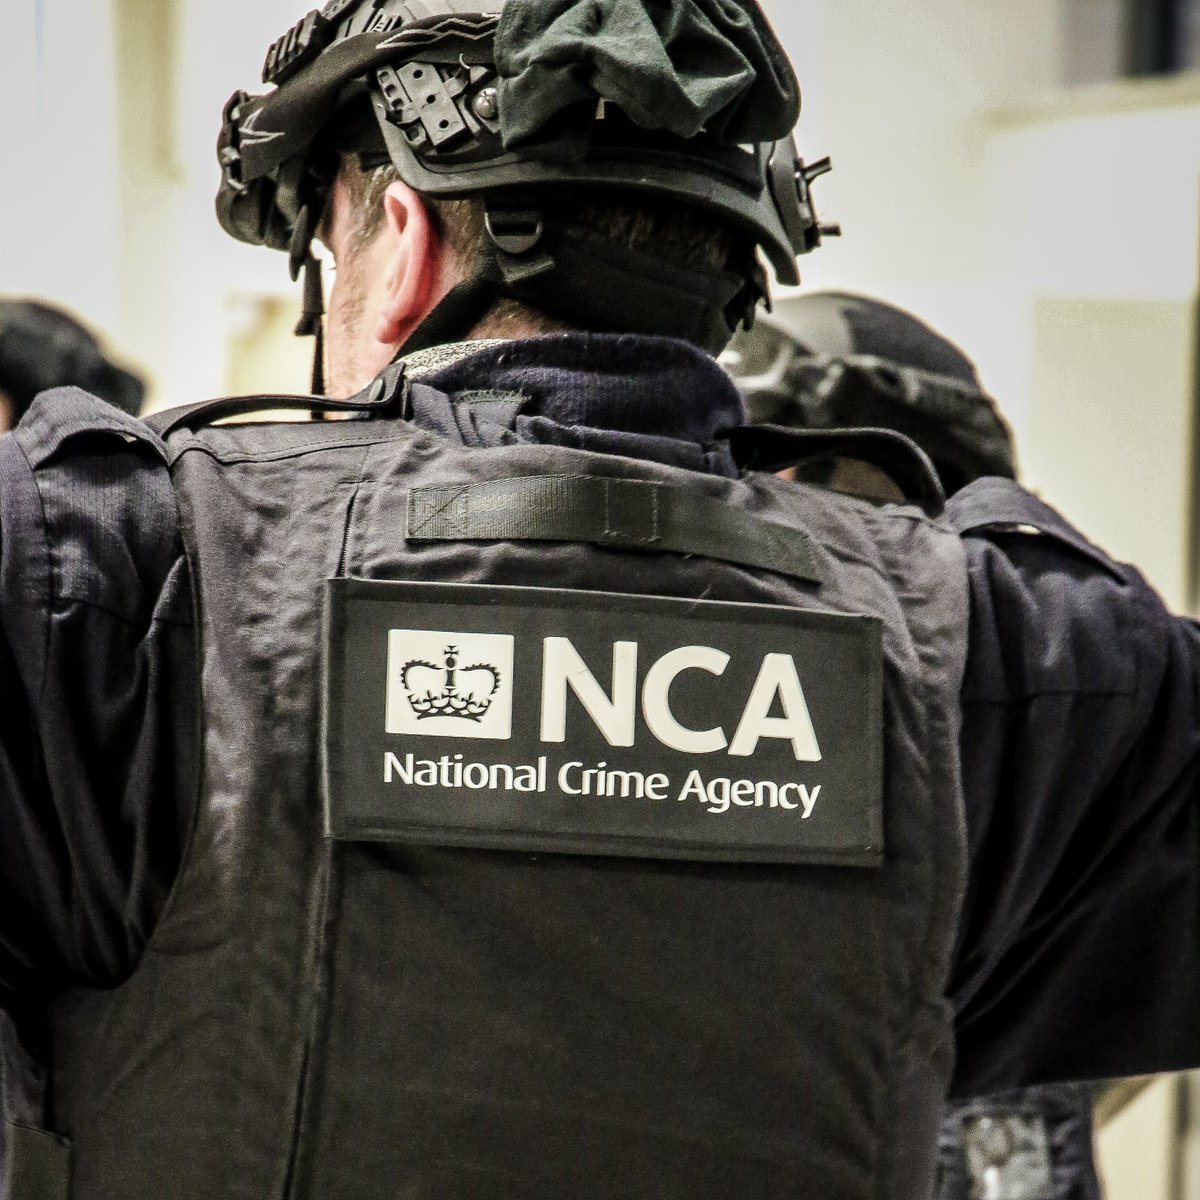 NCA officers have arrested another man over a Channel boat crossing which resulted in the deaths of five people. The Sudanese national was arrested this morning on suspicion of assisting illegal immigration and entering the UK illegally. FULL STORY ⬇️ nationalcrimeagency.gov.uk/news/nca-offic…